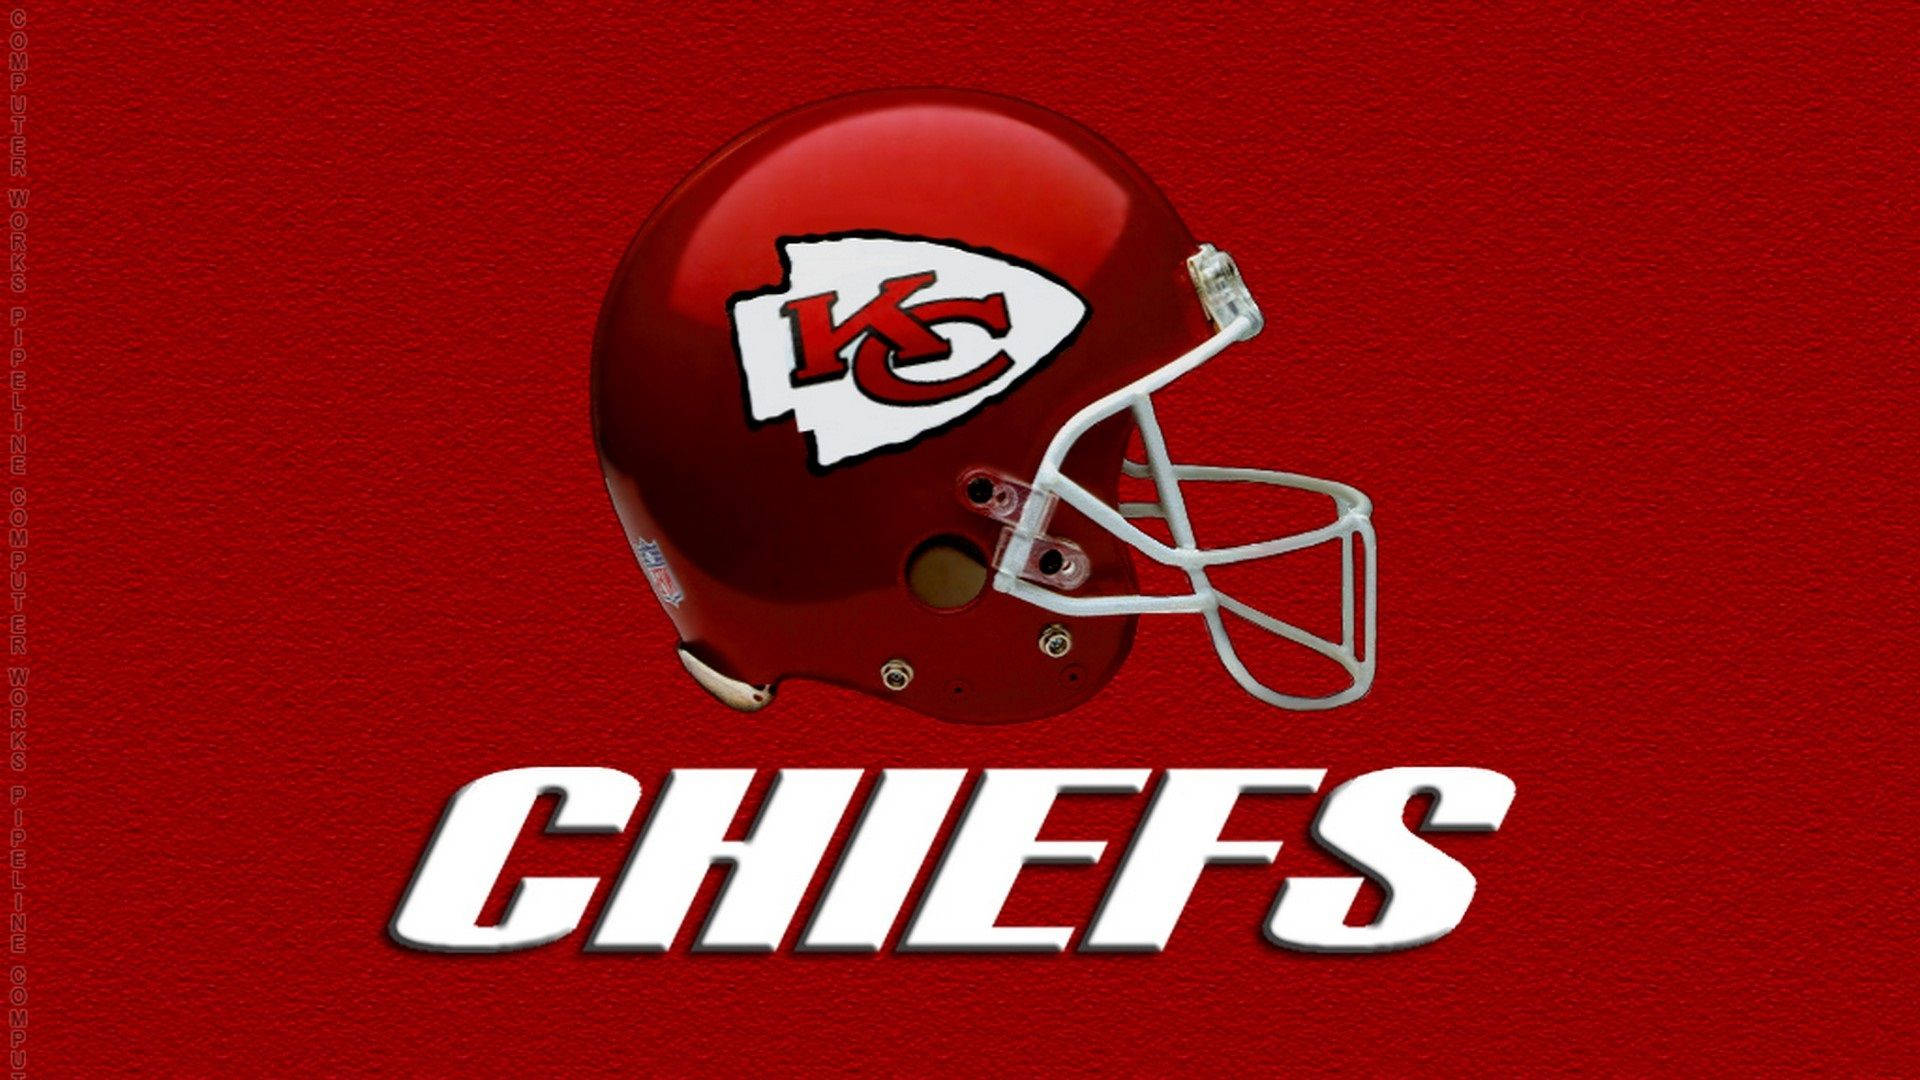 The Kansas City Chiefs showing their cool side. Wallpaper